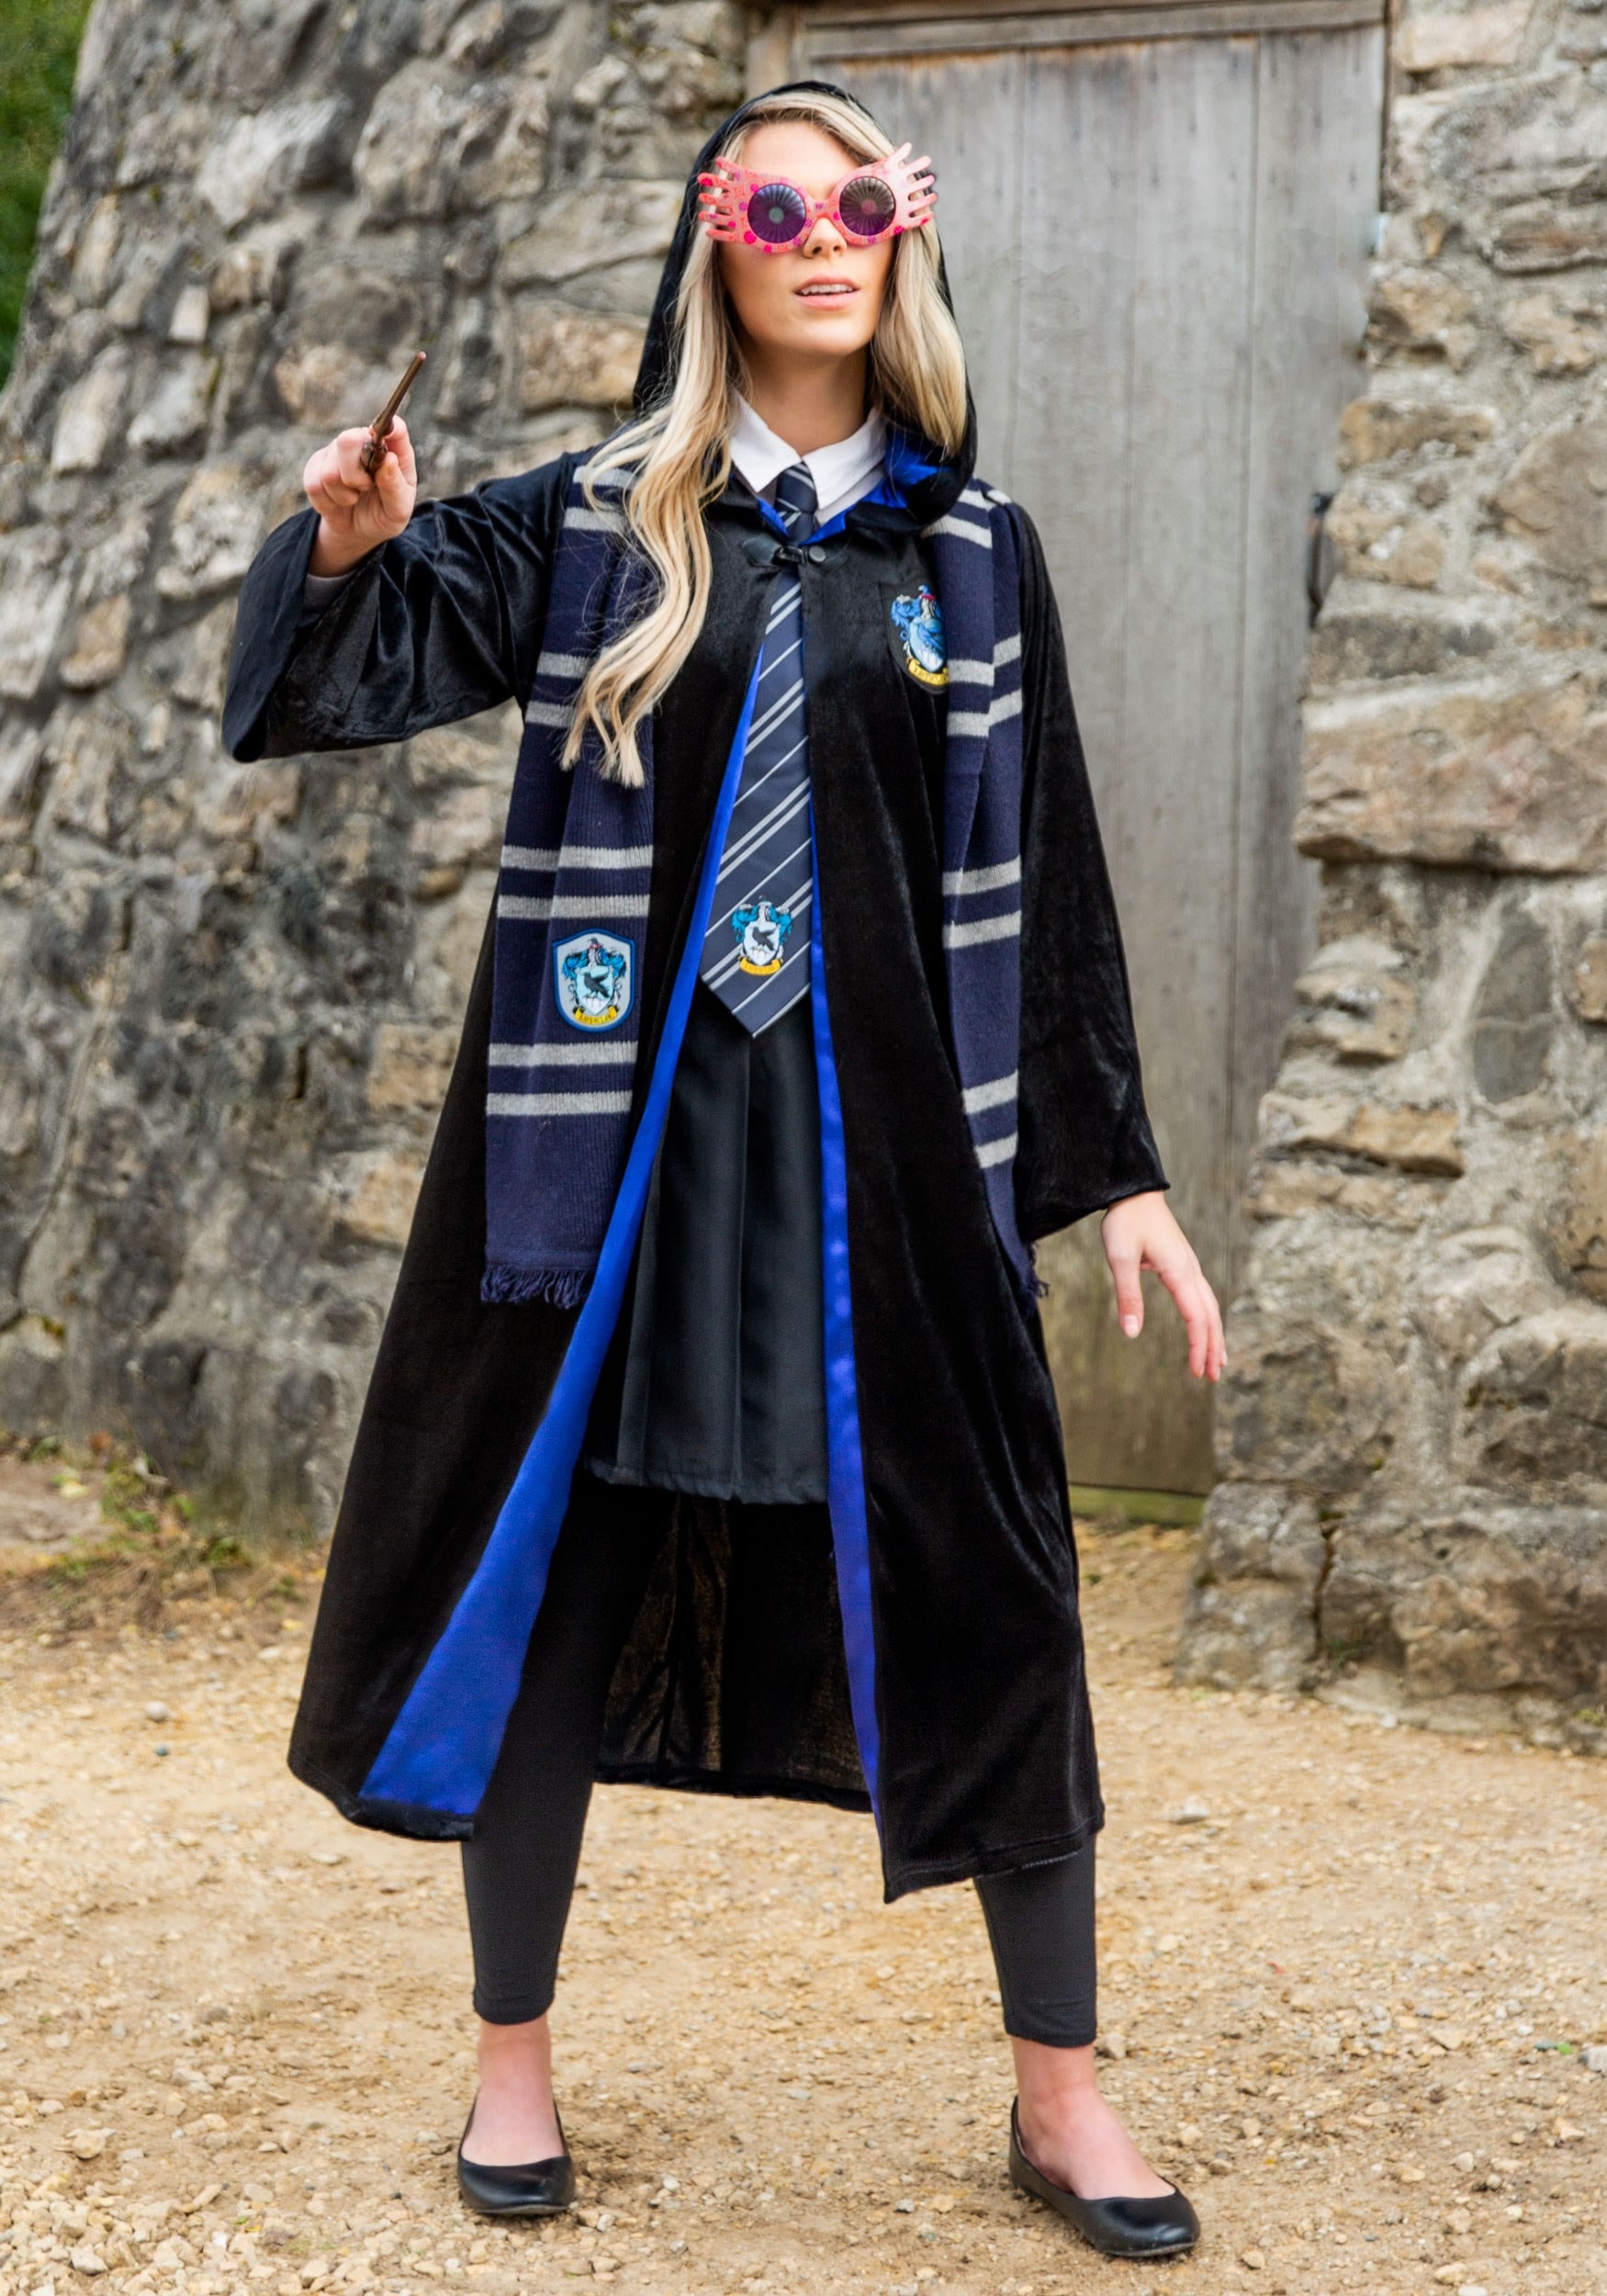 https://images.halloweencostumes.com/products/62966/2-1-142385/deluxe-harry-potter-plus-size-adult-ravenclaw-robe-costume-l.jpg